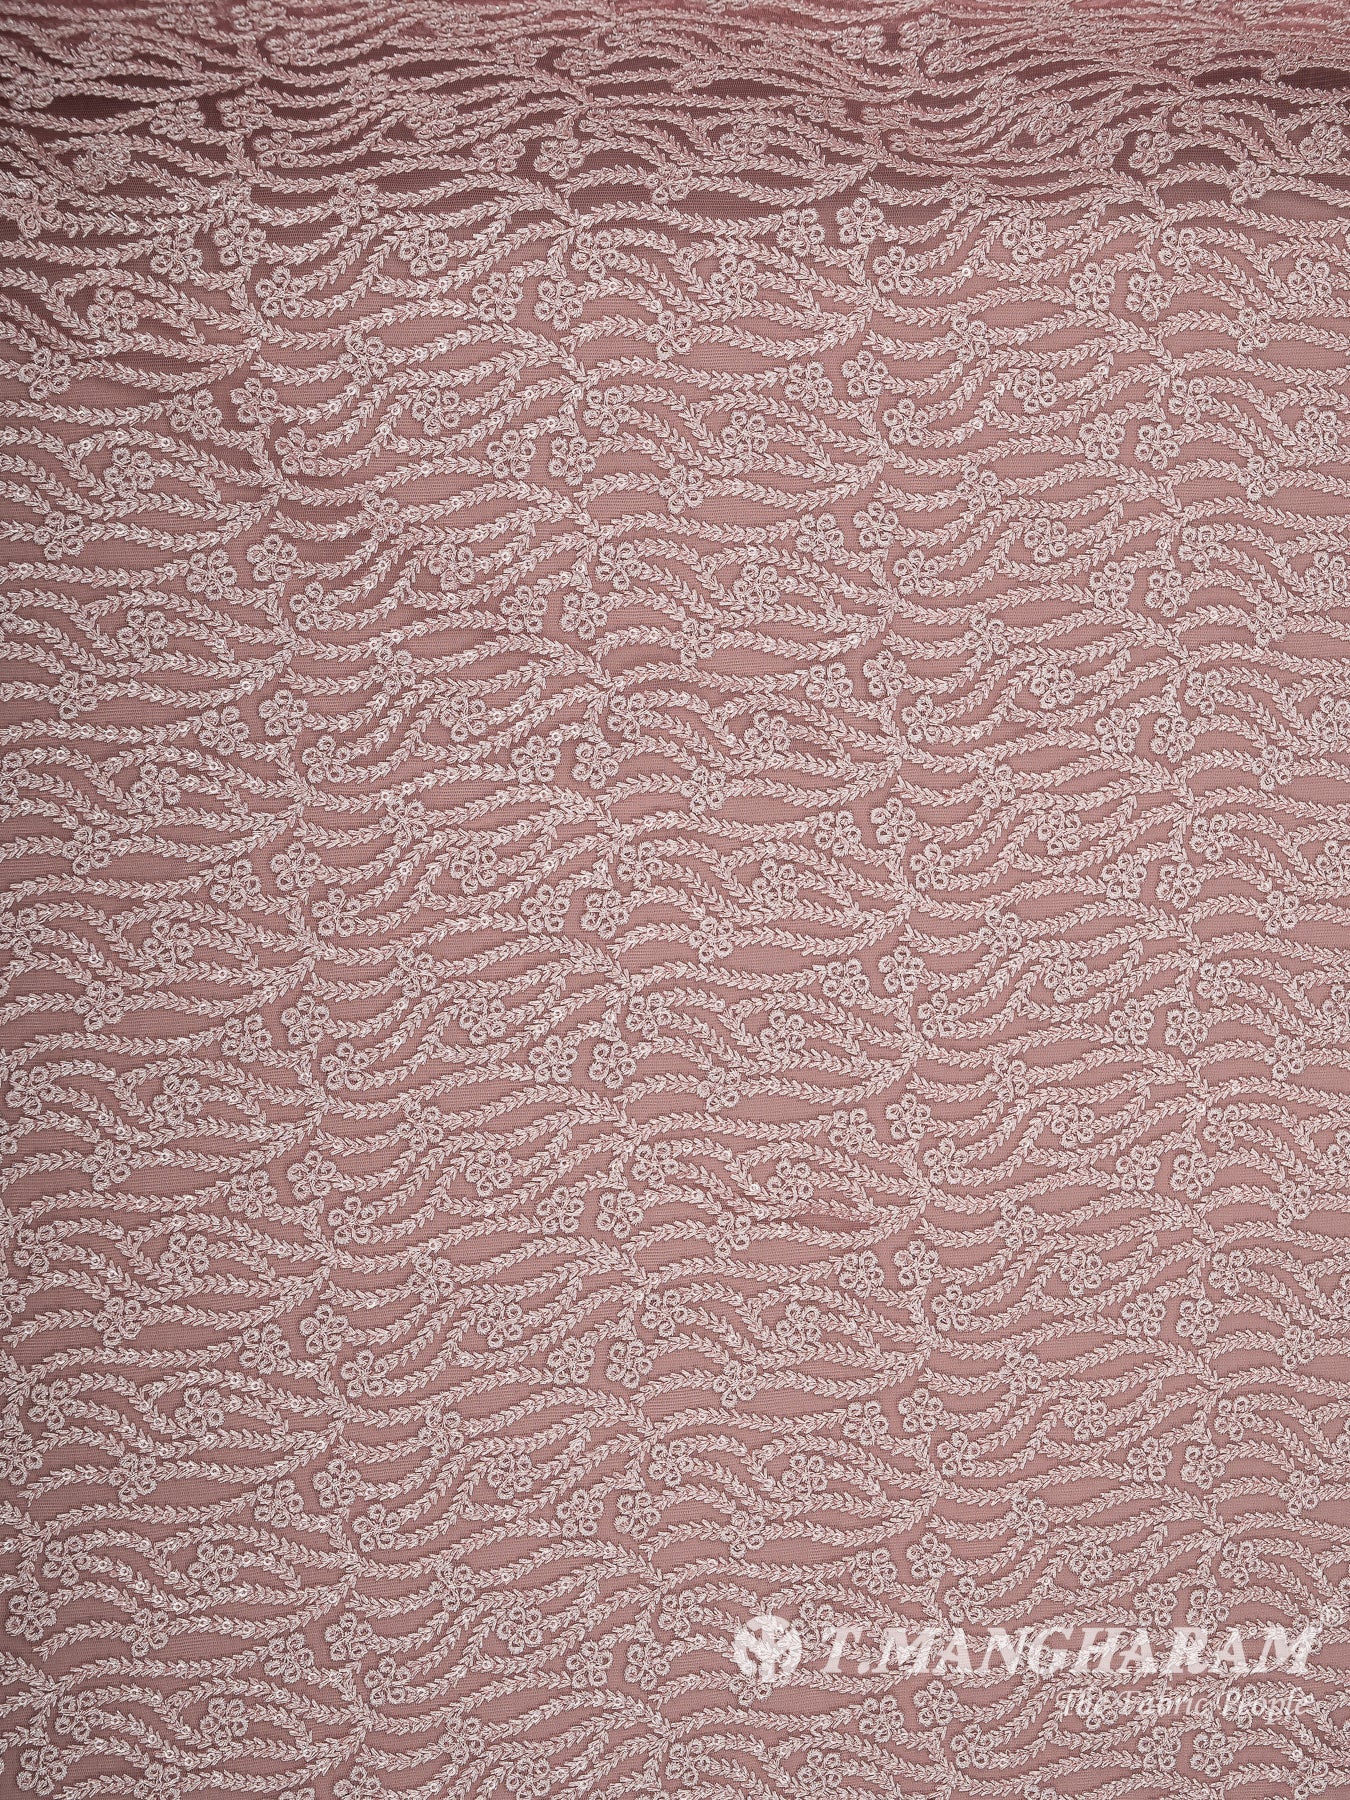 Peach Net Embroidery Fabric - EC8431 view-3